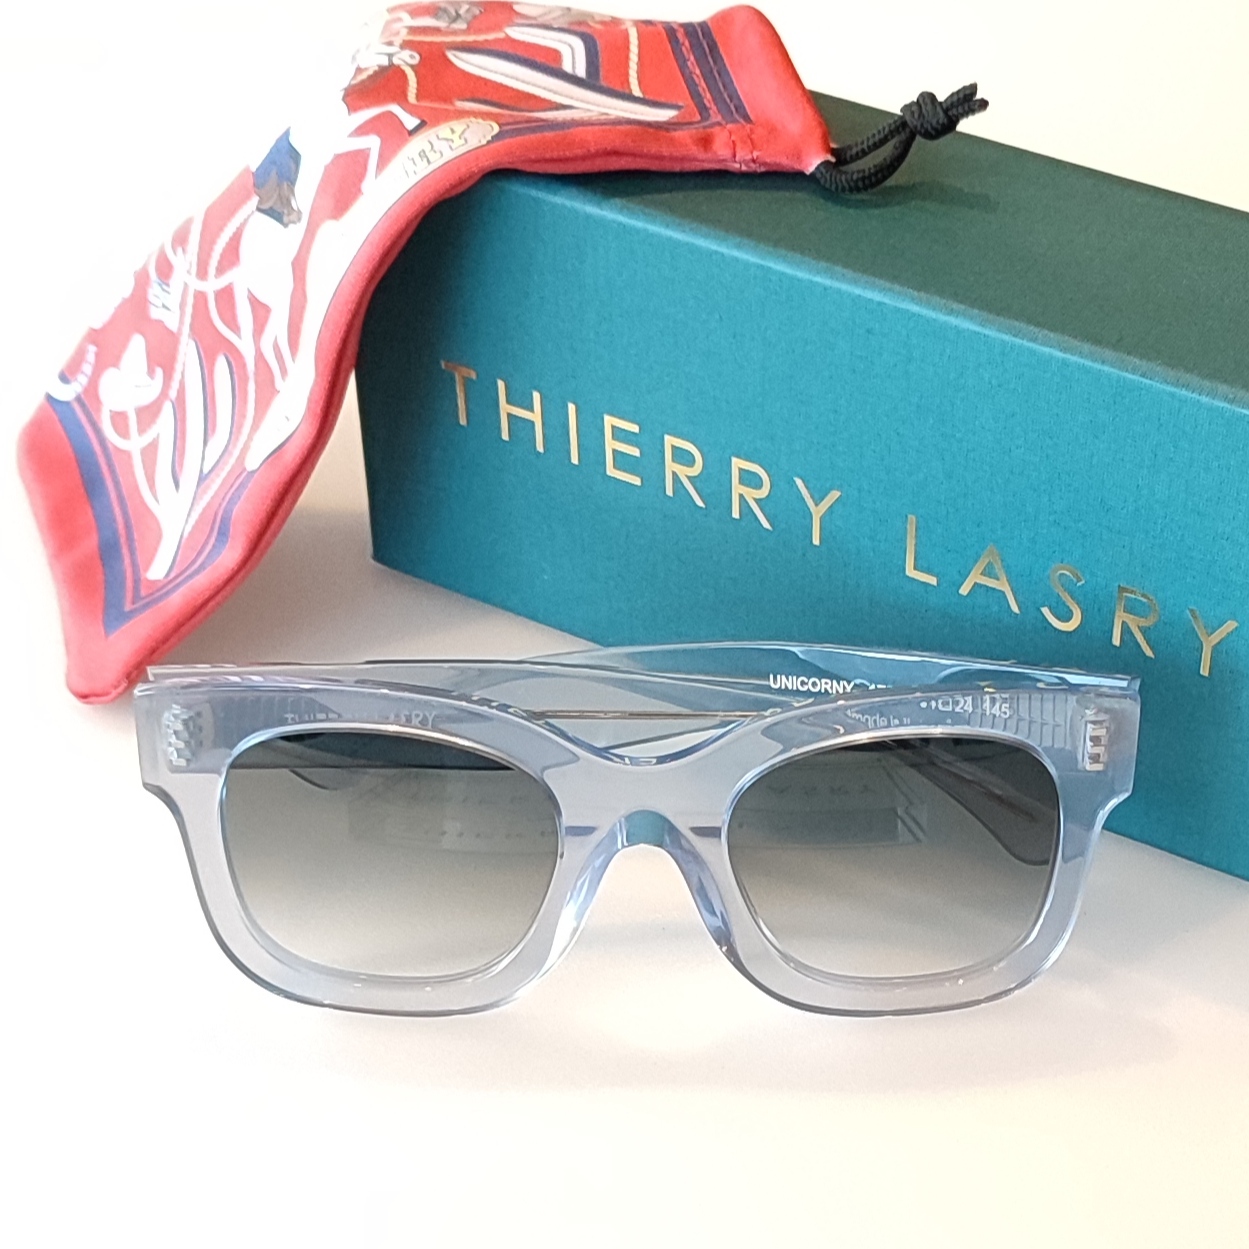 Theirry Lasry Unicorny frame in colour 1703